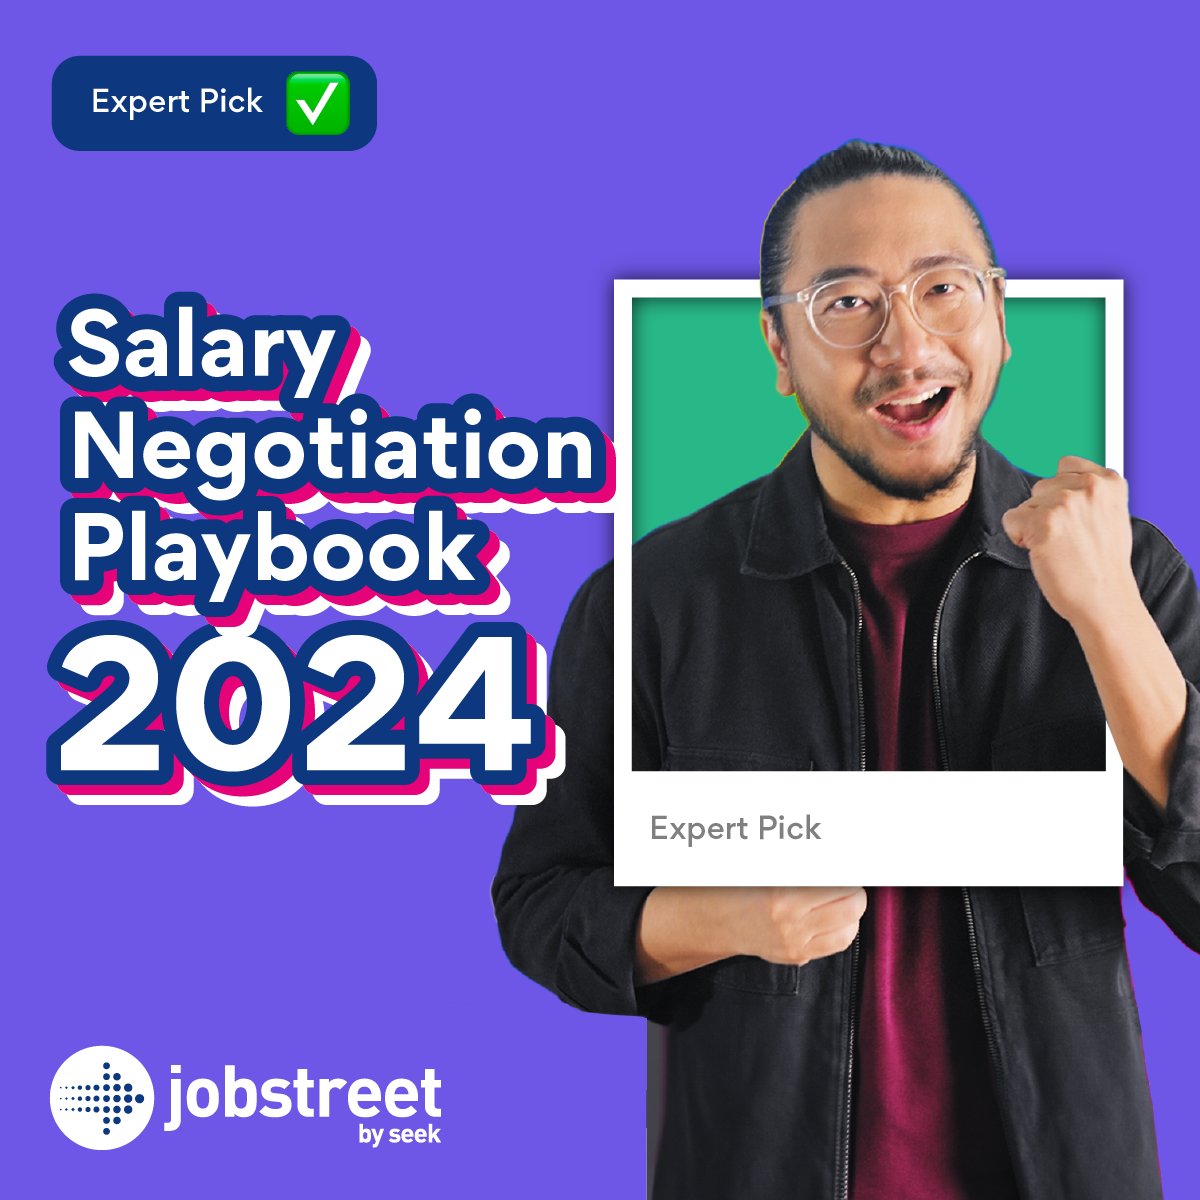 Negotiation skills + EXCLUSIVE prizes = the ultimate combo!​
Learn to get paid what you deserve with our #SalaryCollection and stand chance to win a FREE salary Negotiation Cheat Sheet and RM10 TnG voucher!​
🔗: bit.ly/3UKmfg6
#BetterMatches #Salary #CareerHub #Jobstreet